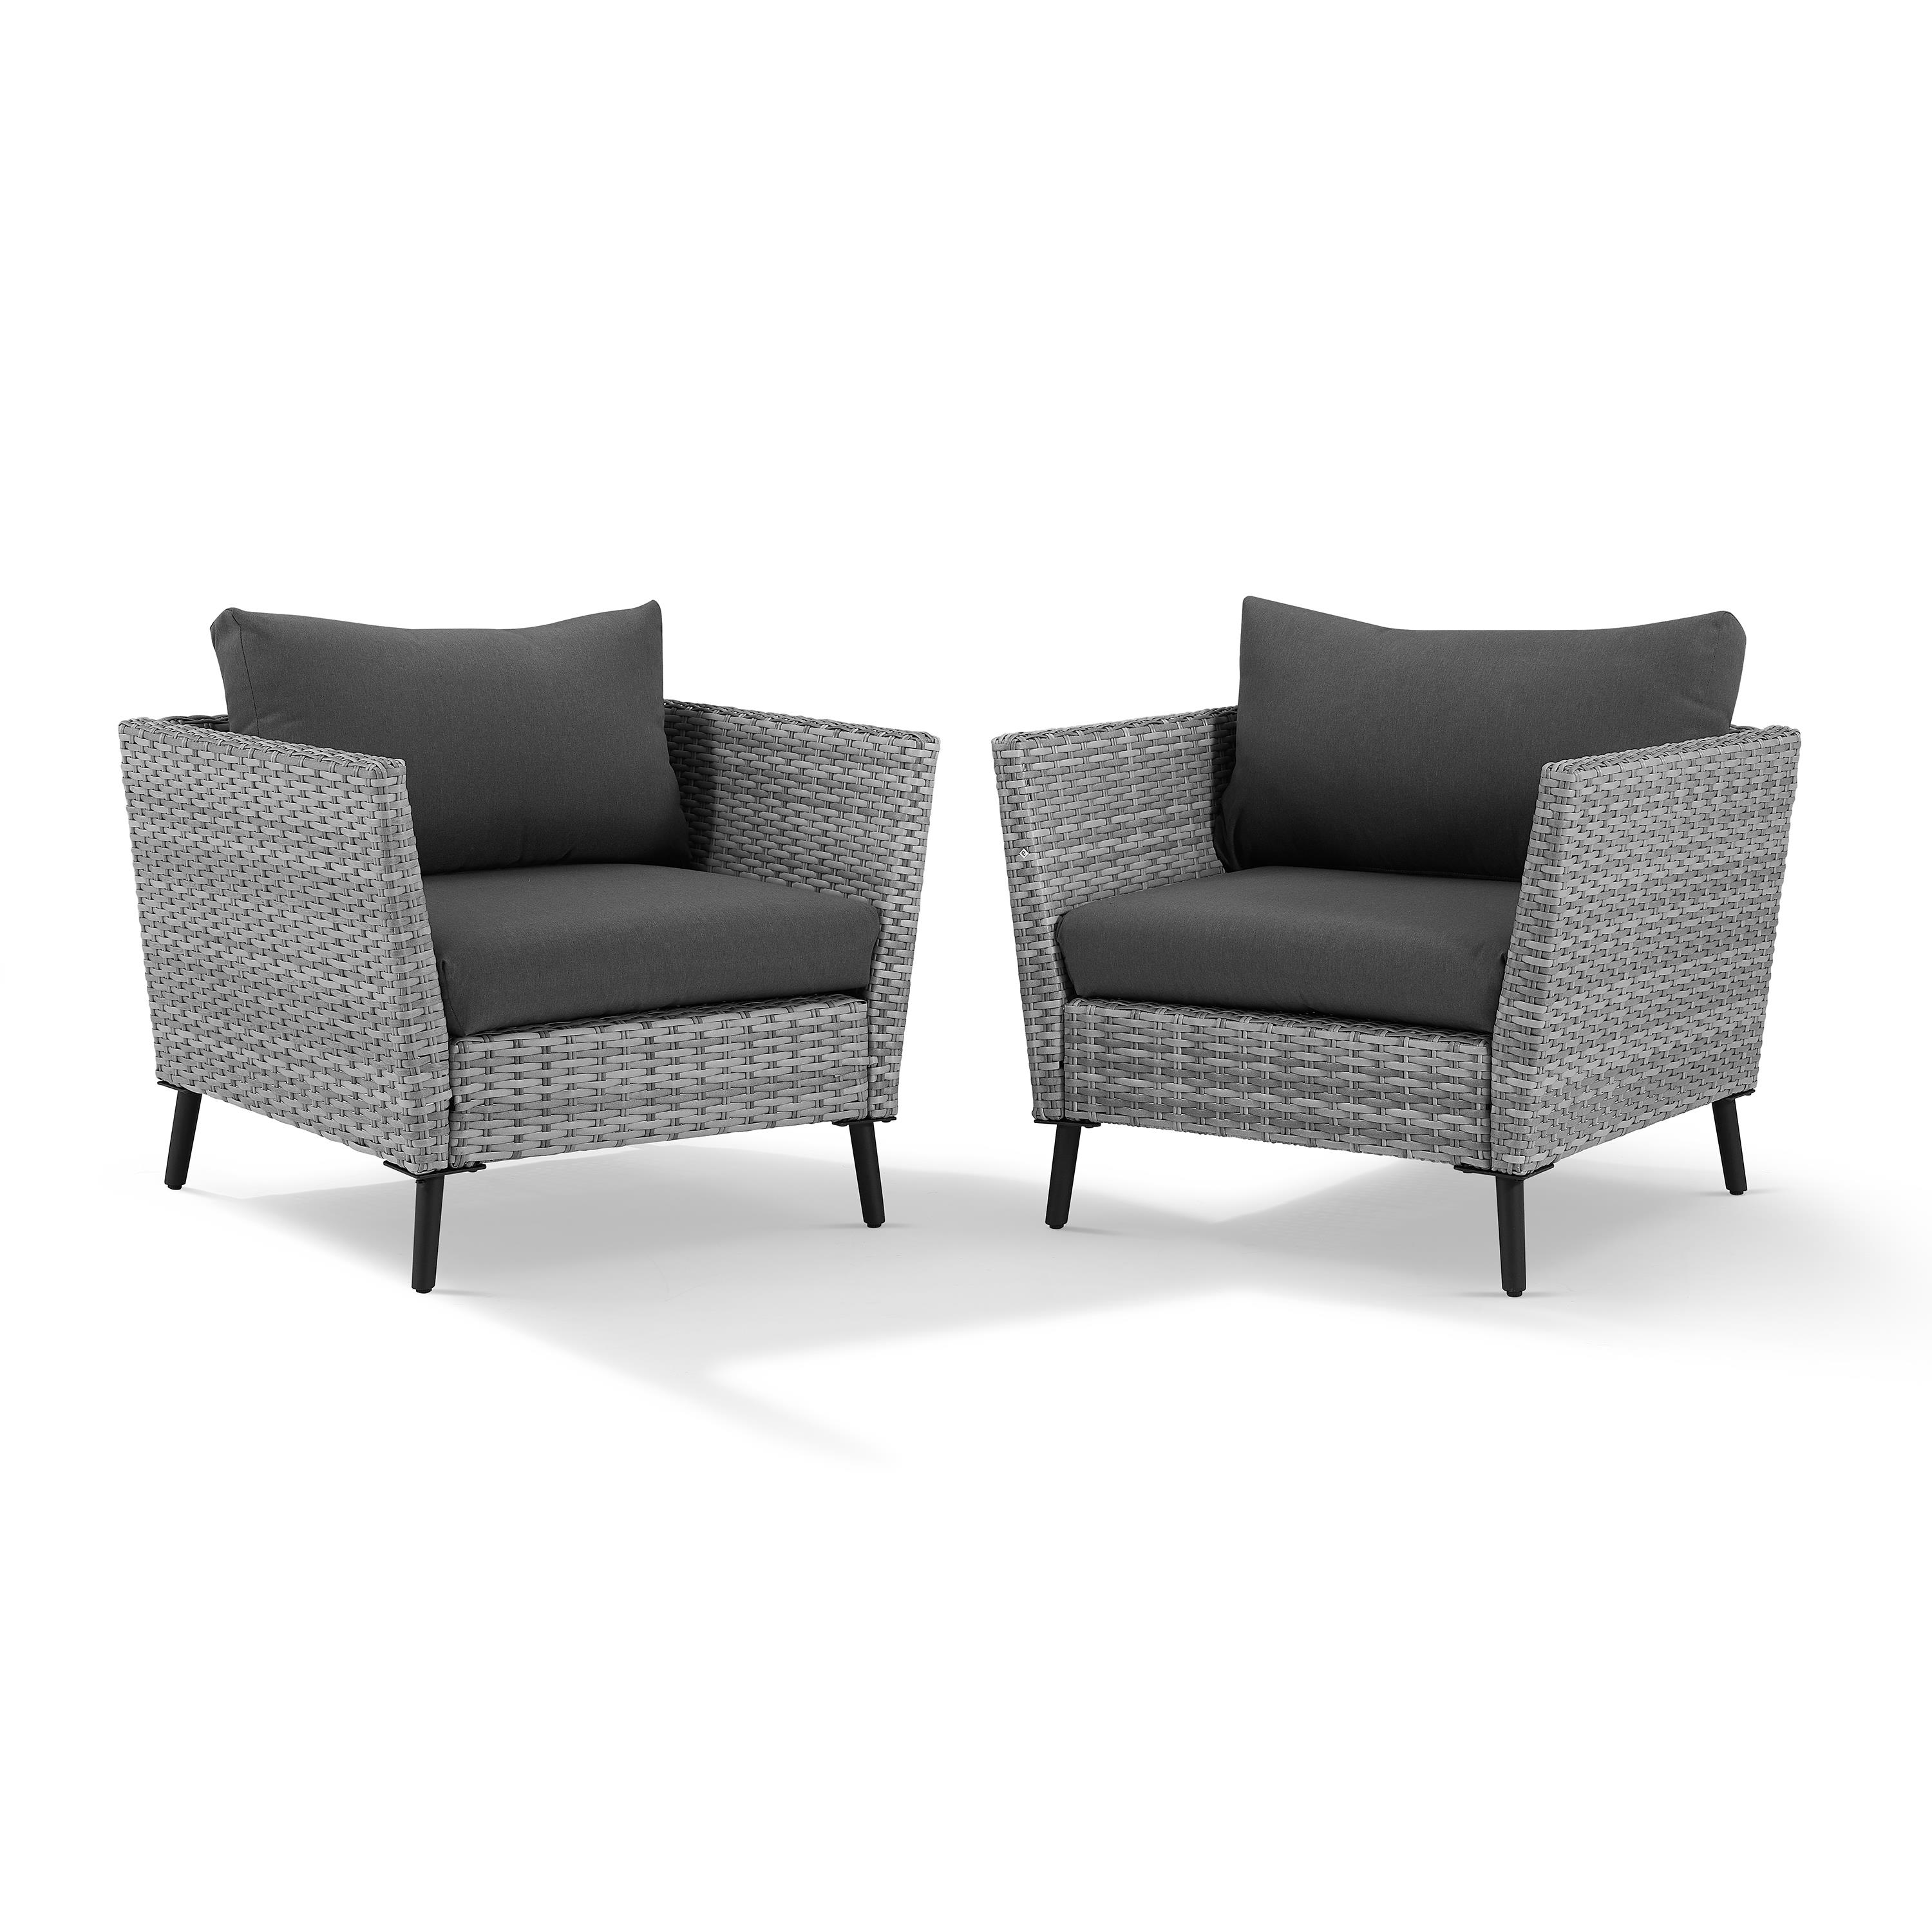 Crosley Richland Wicker Patio Arm Chair in Gray (Set of 2) - image 2 of 10